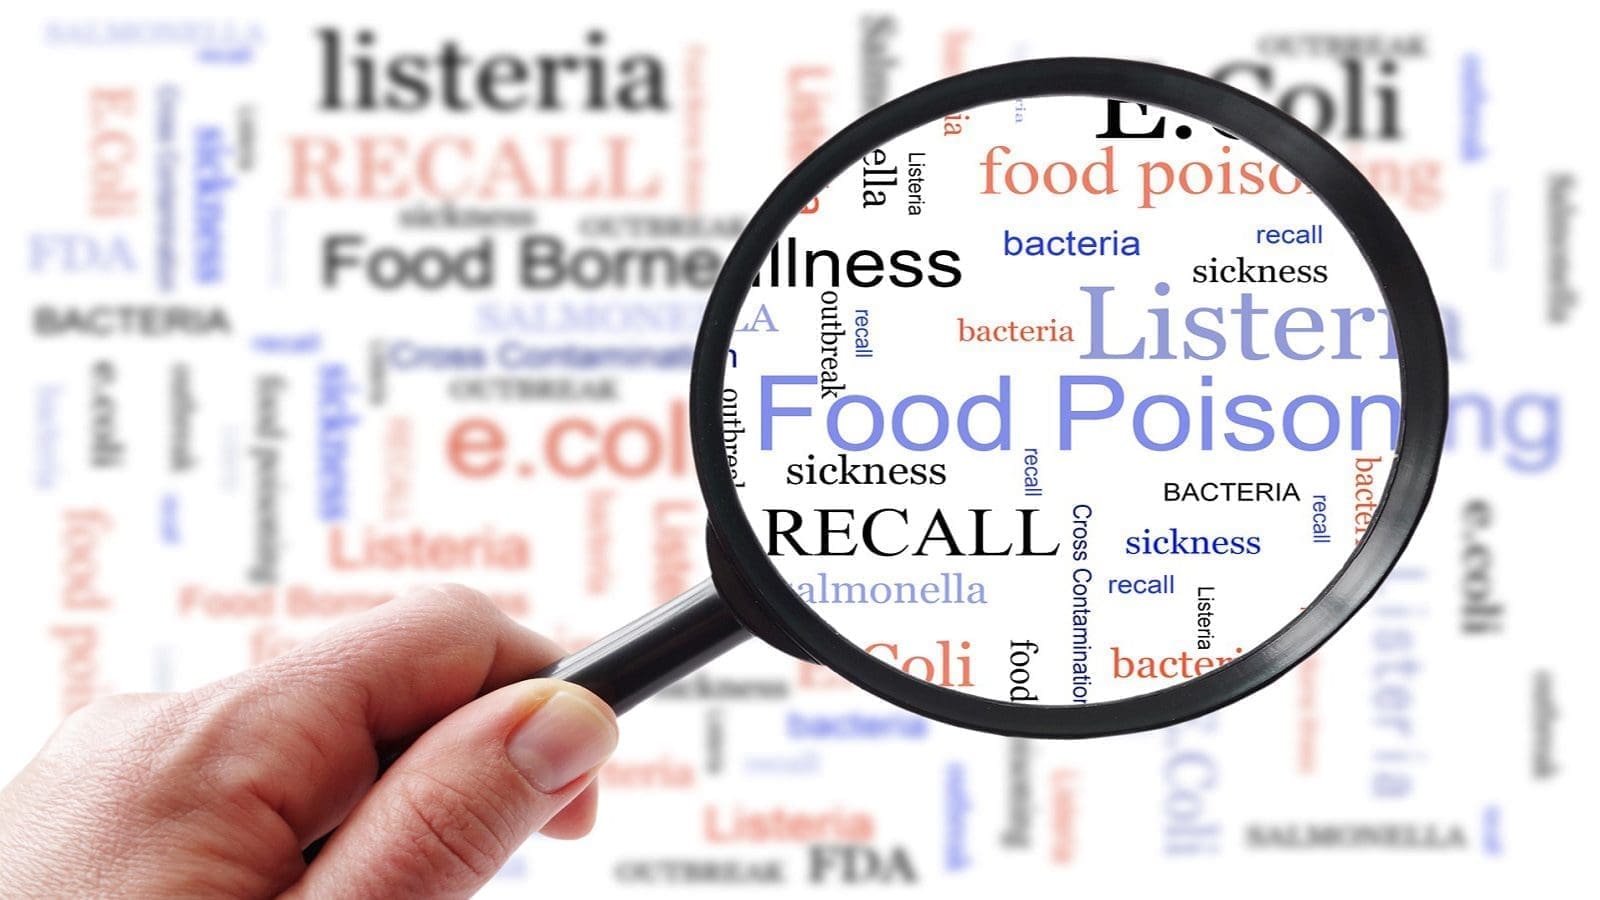 Ongoing foodborne illness outbreaks stump federal officials, raising concerns for public health